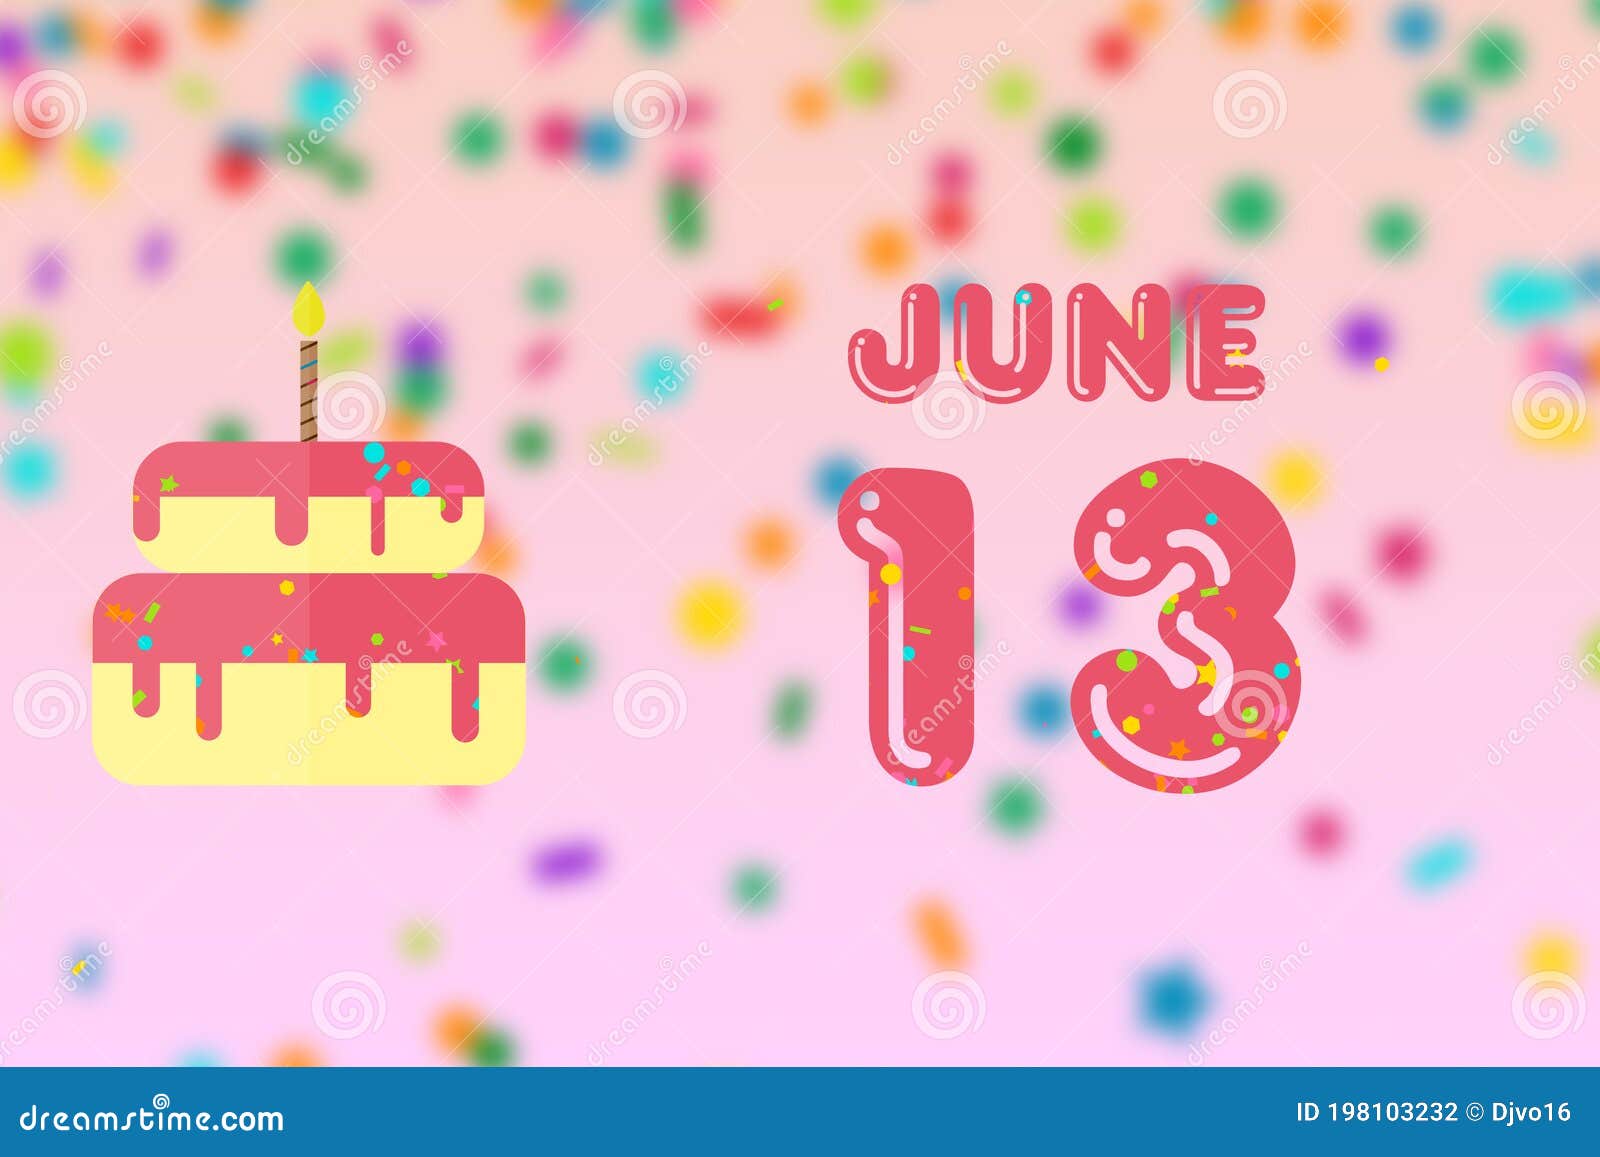 June 13th. Day 13 of Month,Birthday Greeting Card with Date of Birth and Birthday Cake. Summer Month, Day of the Year Concept Stock Illustration - Illustration of summer, symbol: 198103232